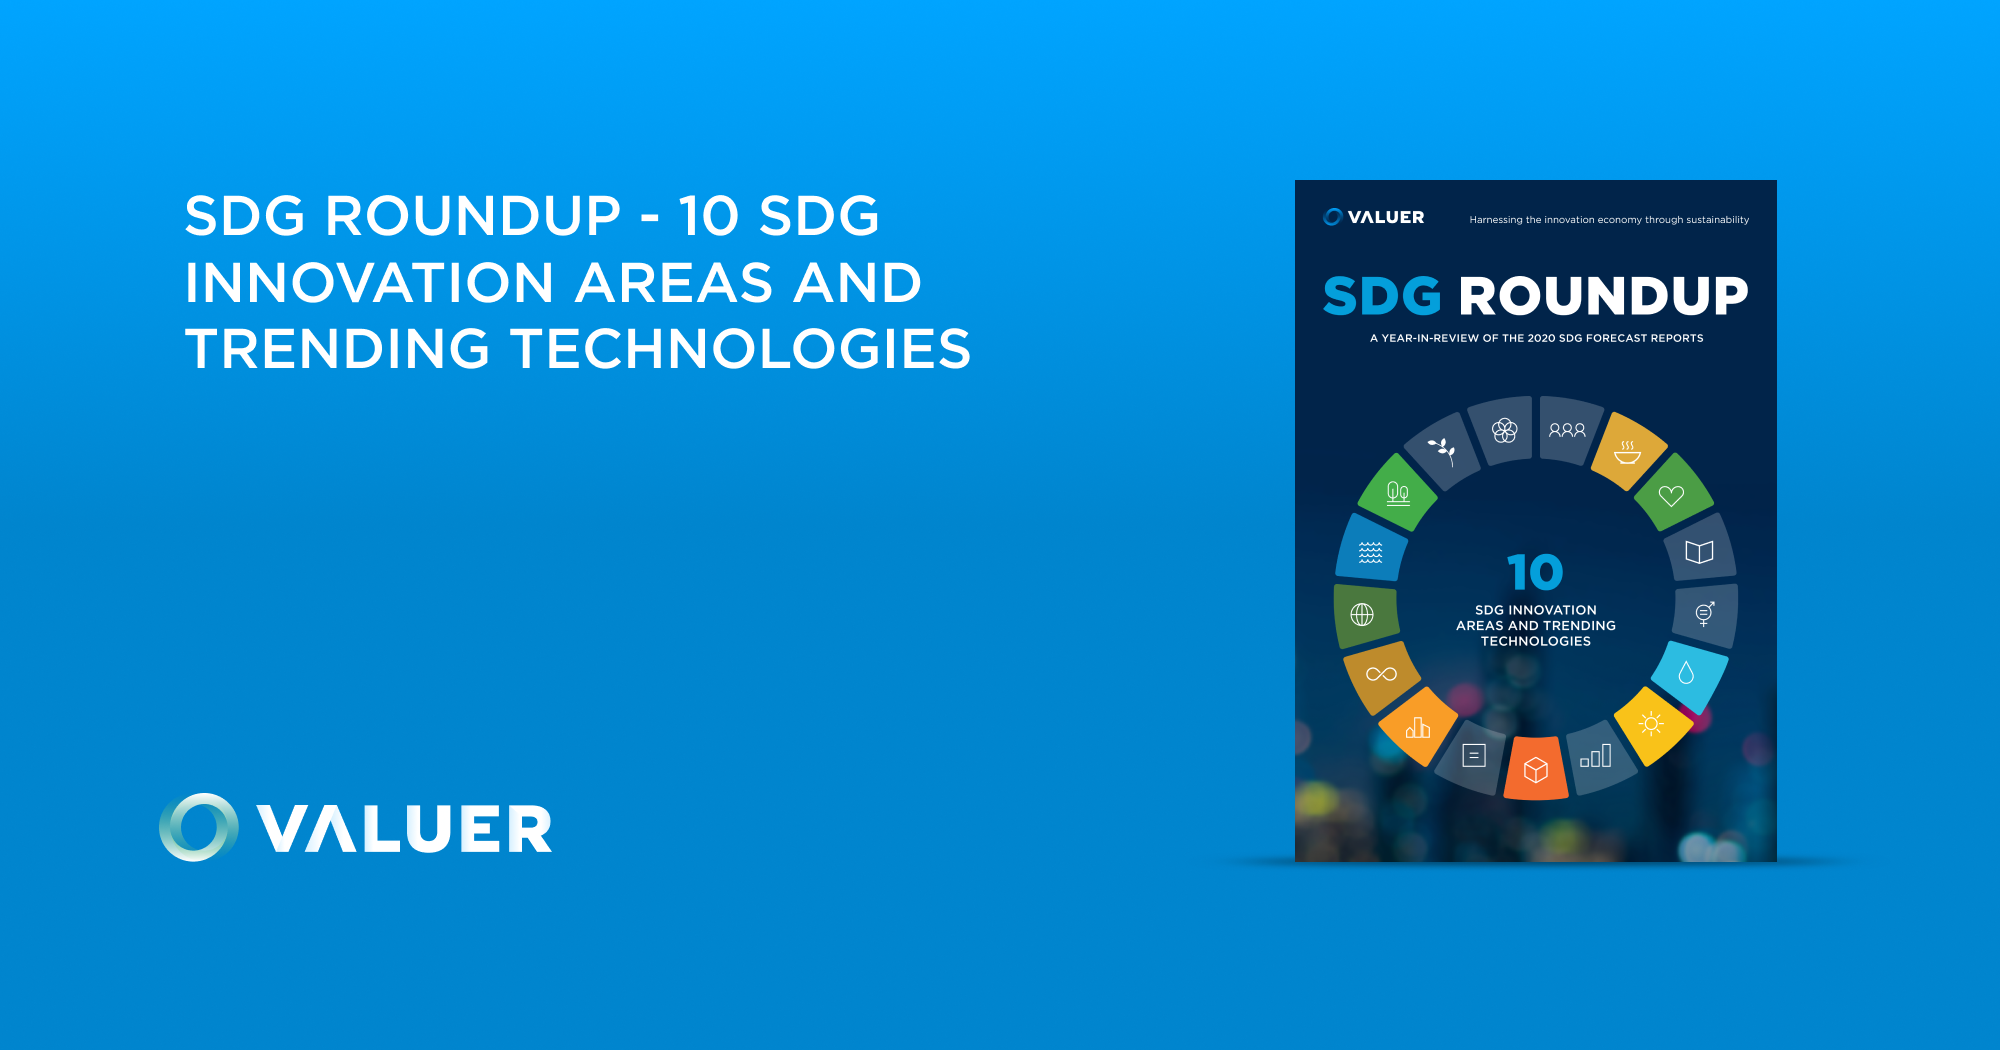 The 10 SDG Innovation Areas and Trending Technologies